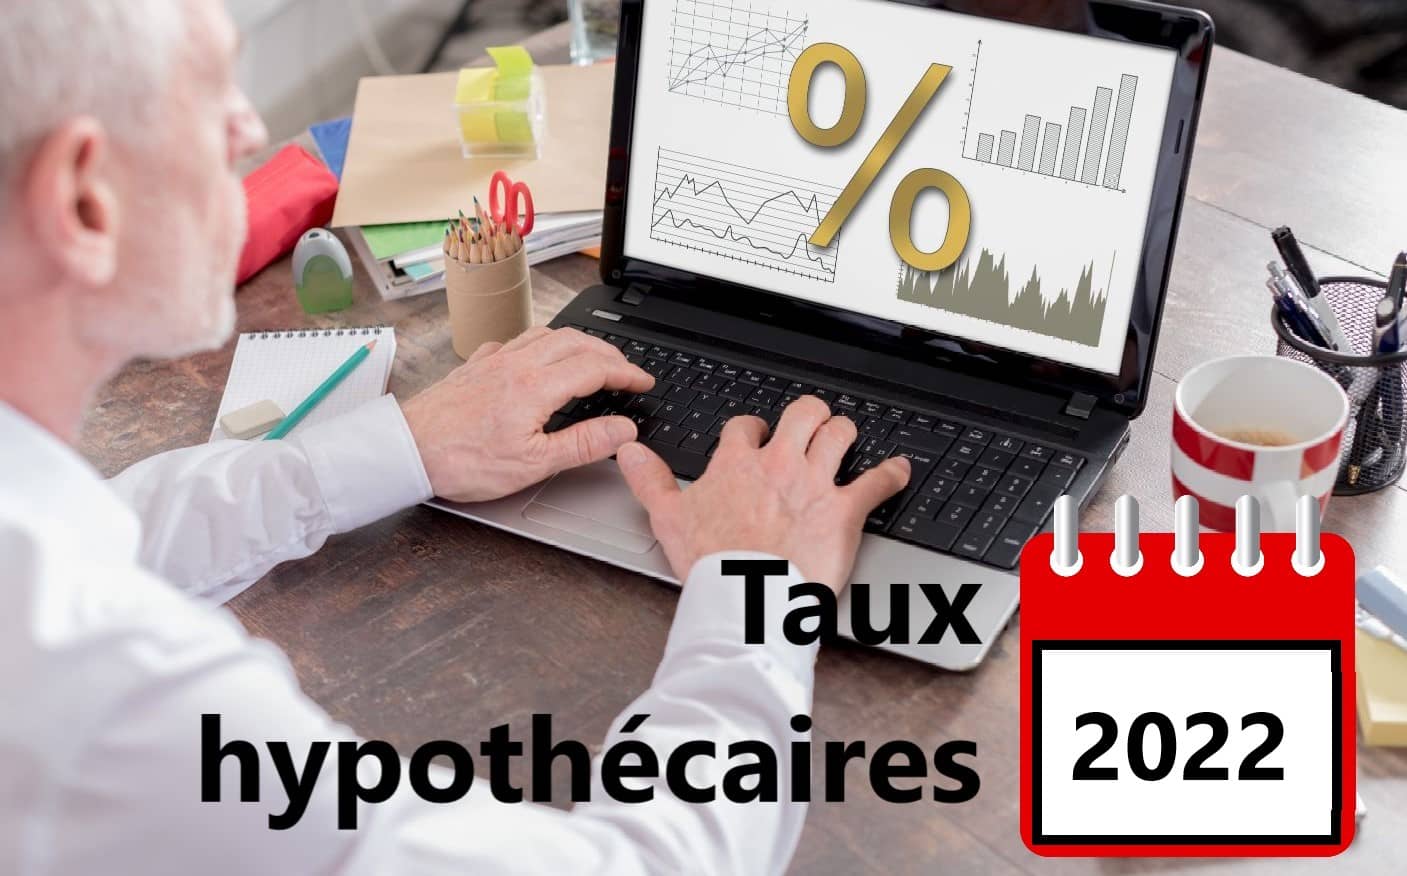 taux hypothecaires 2022